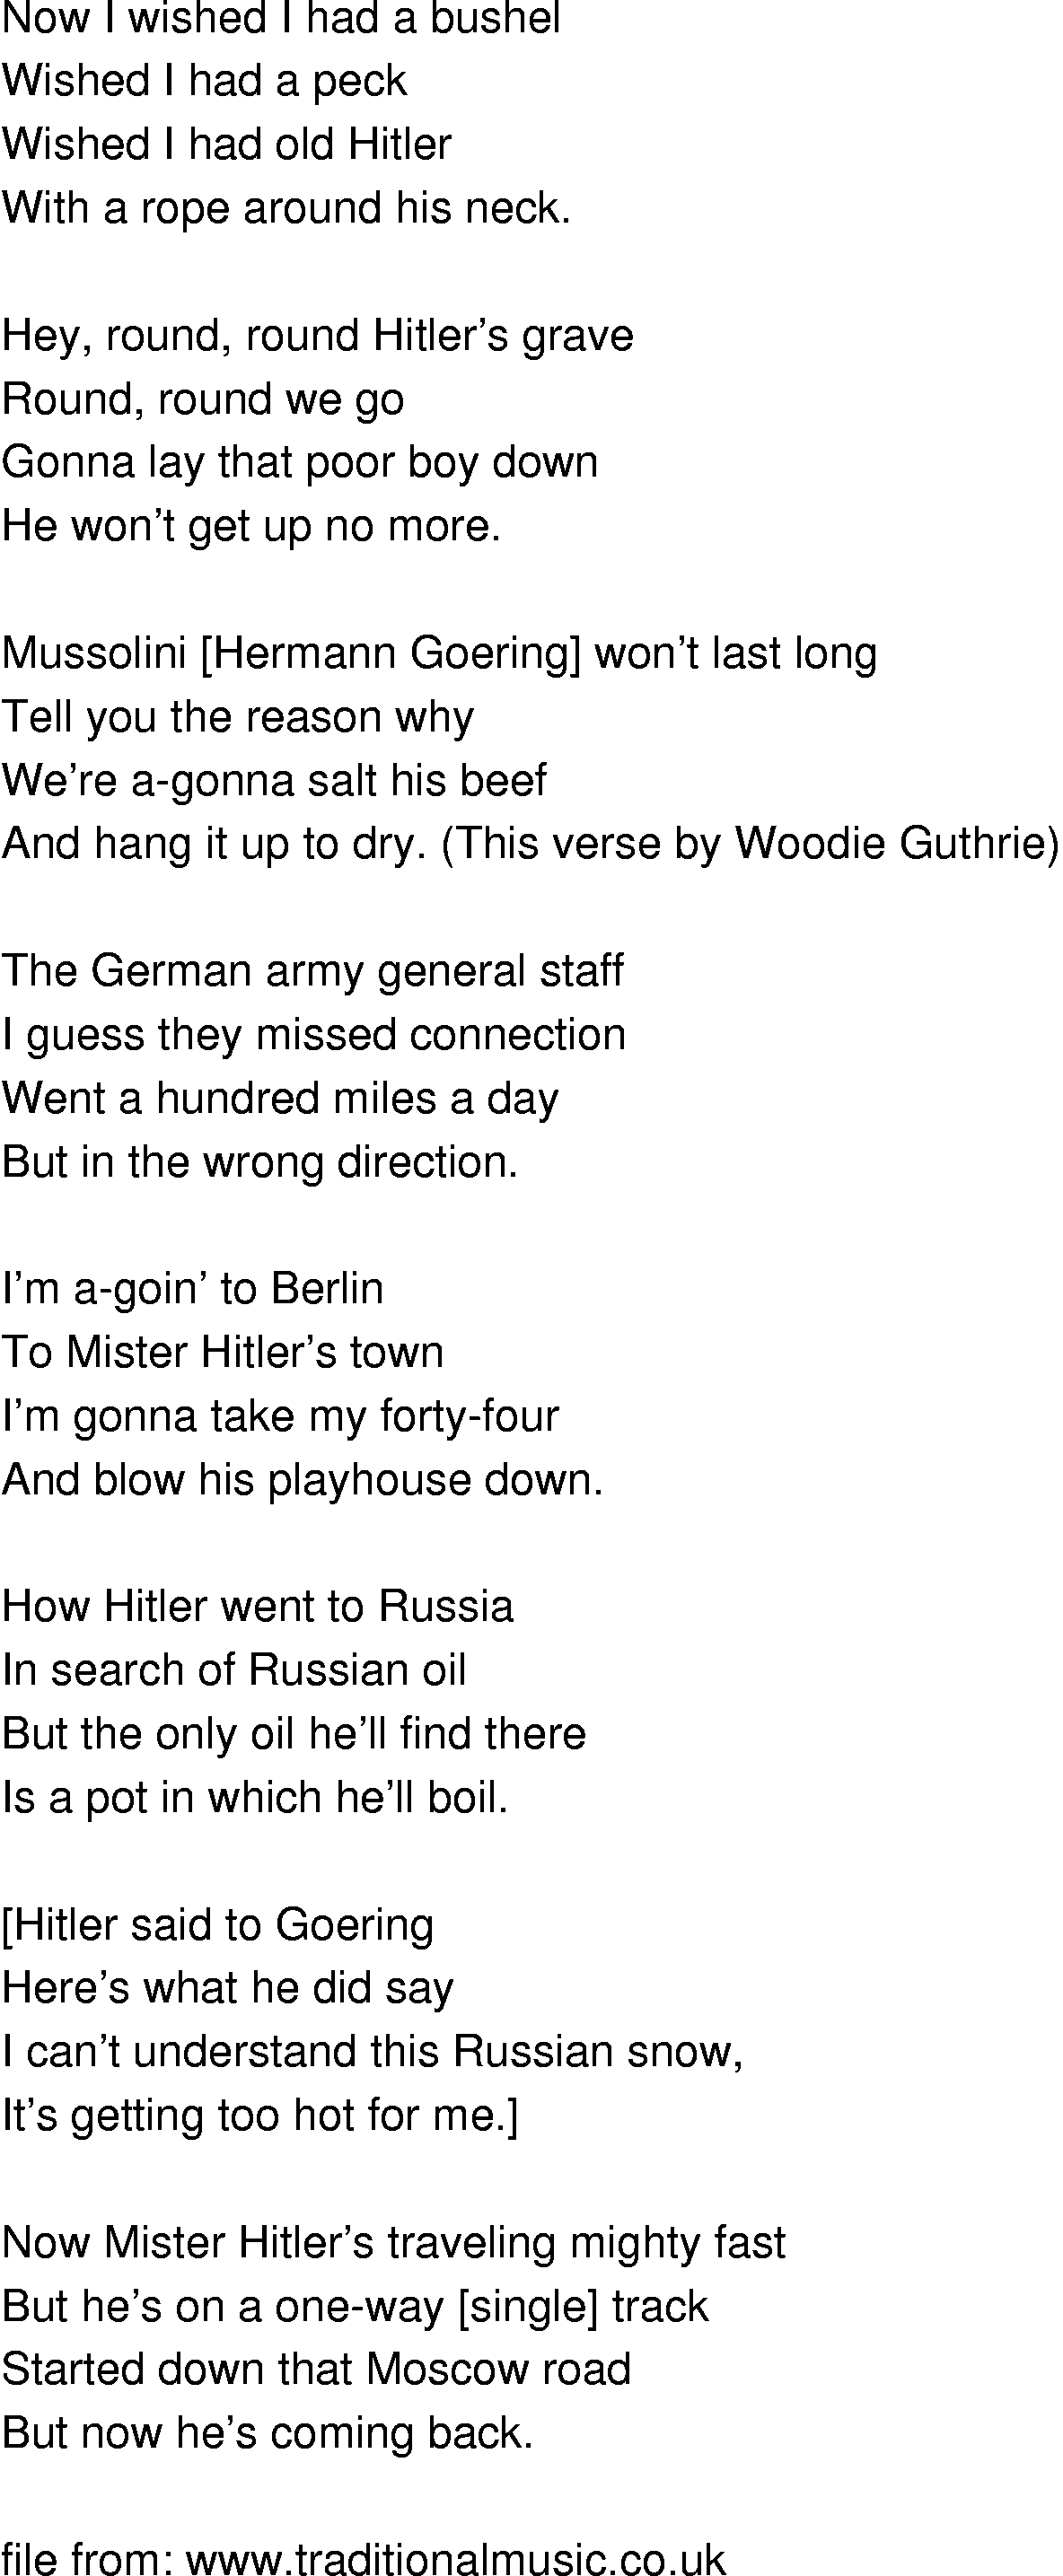 Old-Time (oldtimey) Song Lyrics - round and round hitlers grave